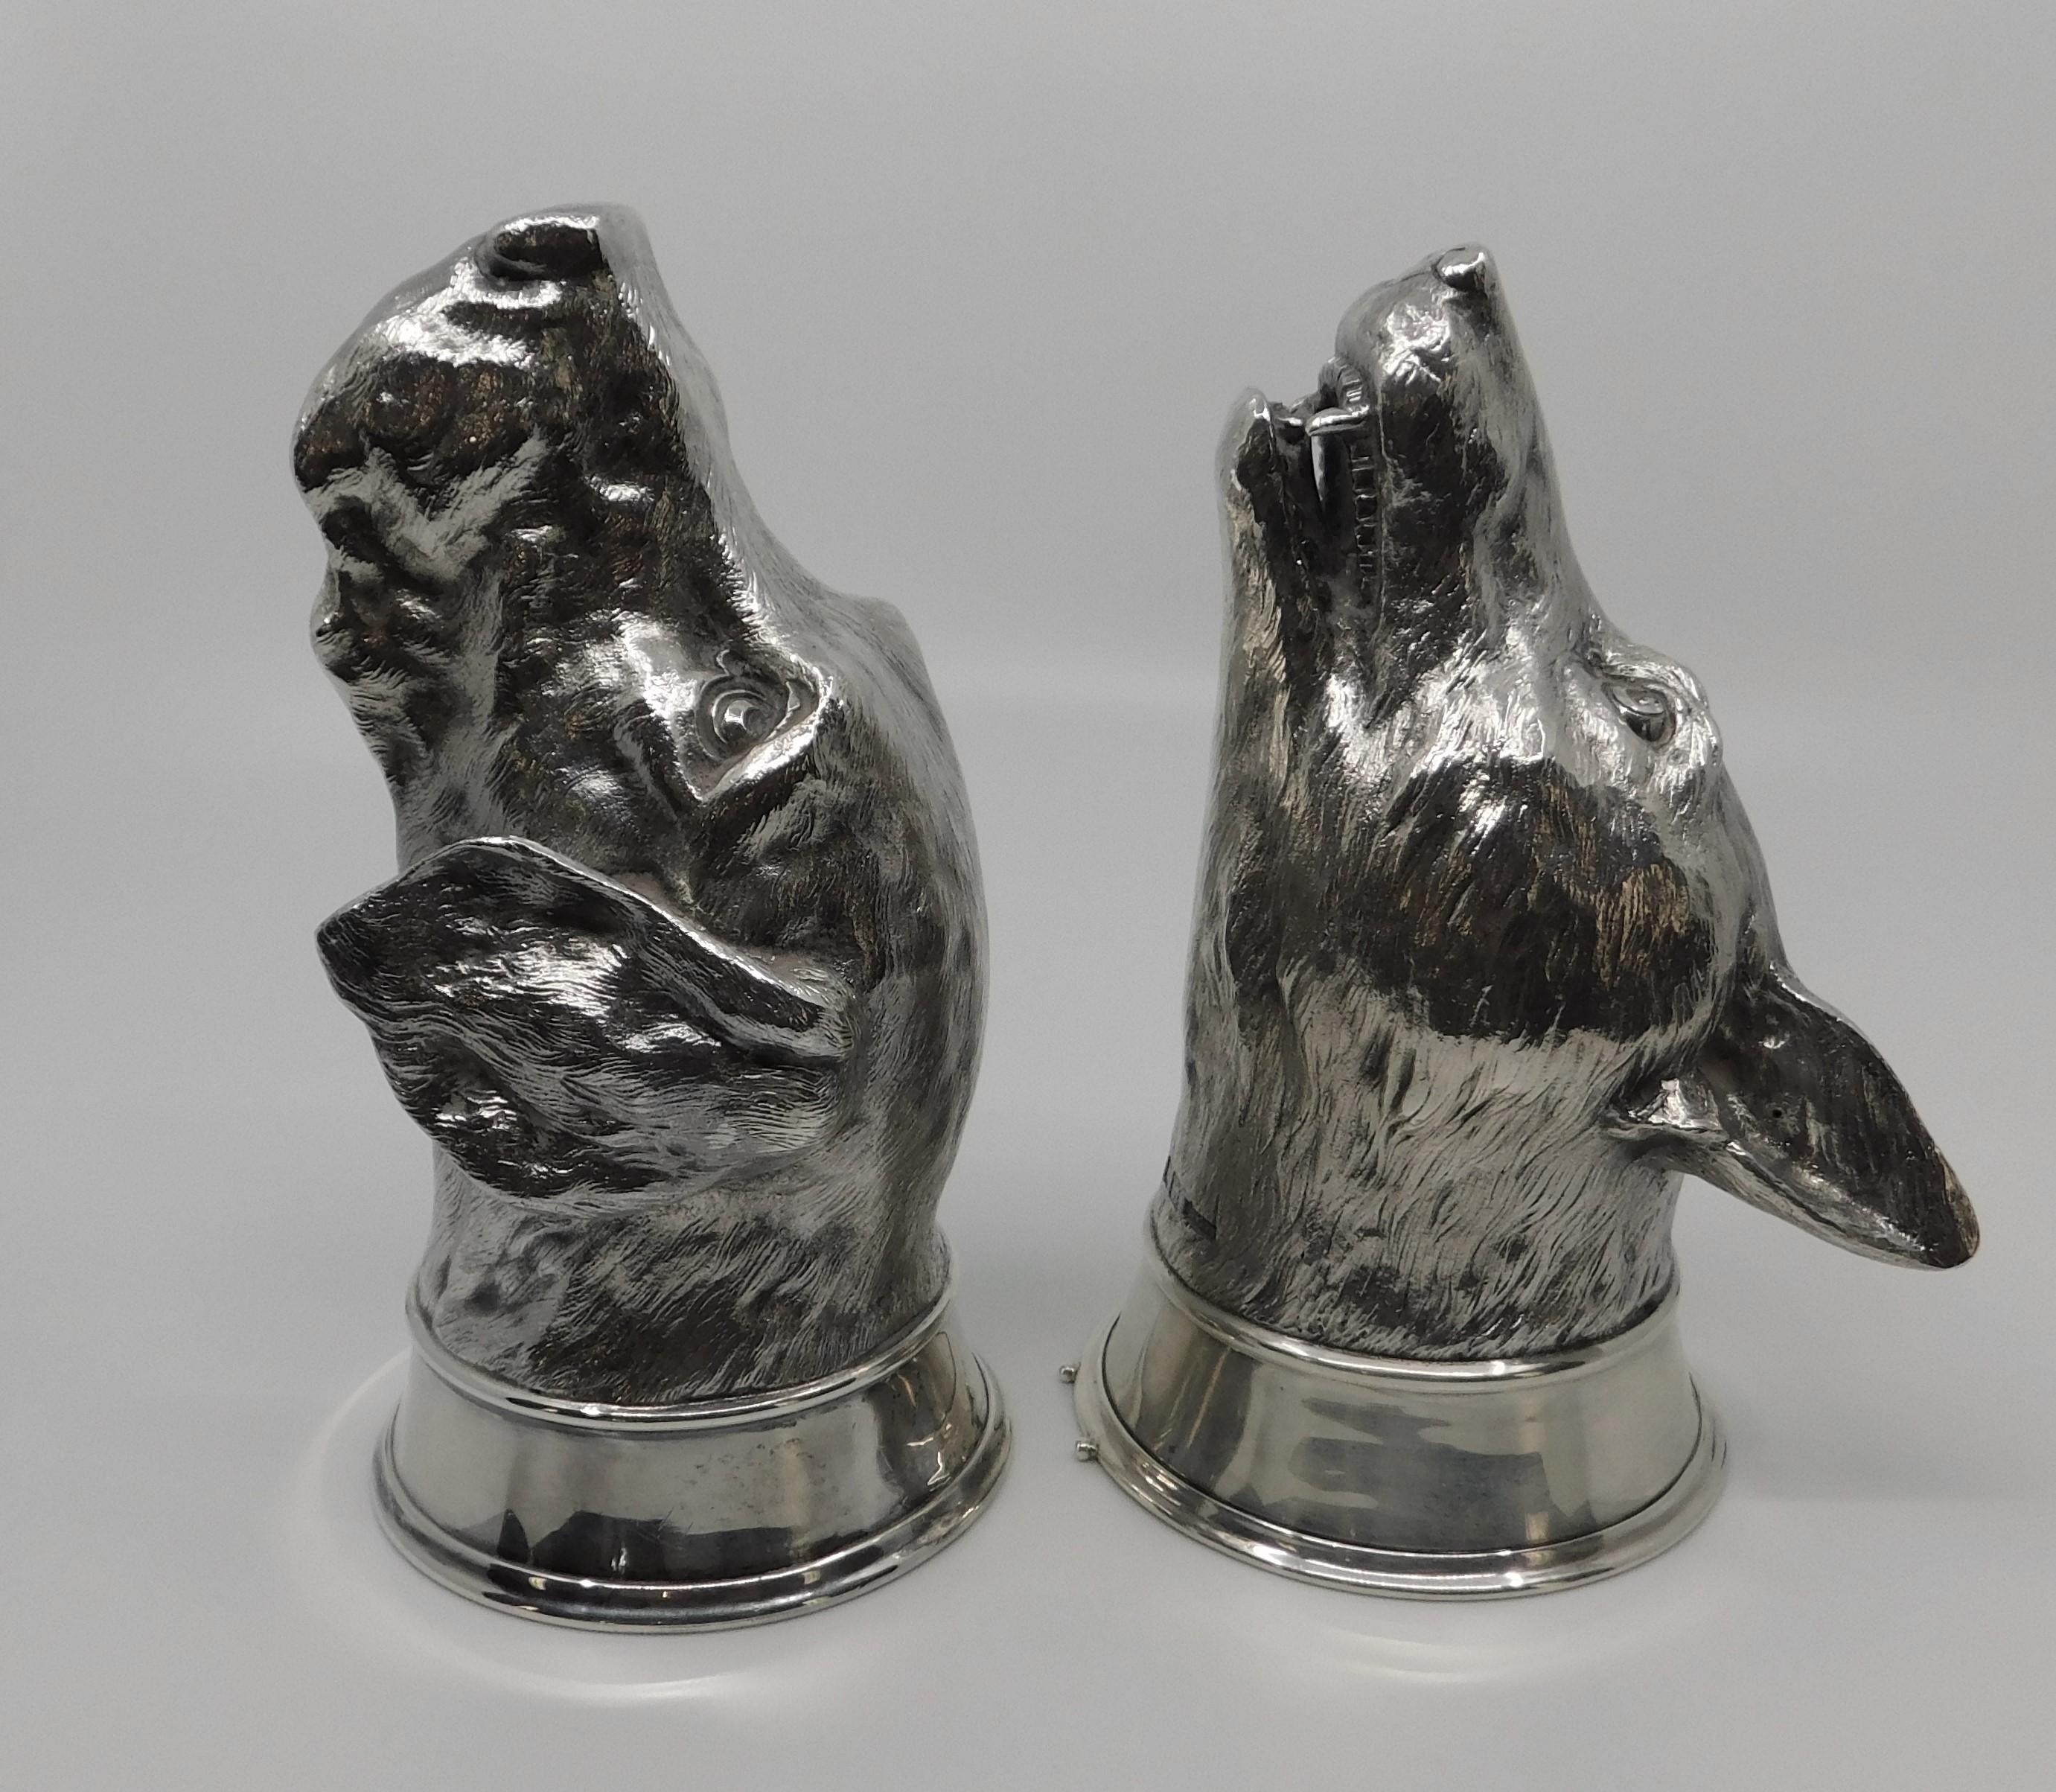 Pair of Asprey & Co., London sterling silver stirrup cups each fully marked on neck. The first in the form of a hound dog dated 1958, measuring 6.75 inches long x 3.5 inches round. The second is an open-mouthed fox dated 1959 measuring 6.5 inches